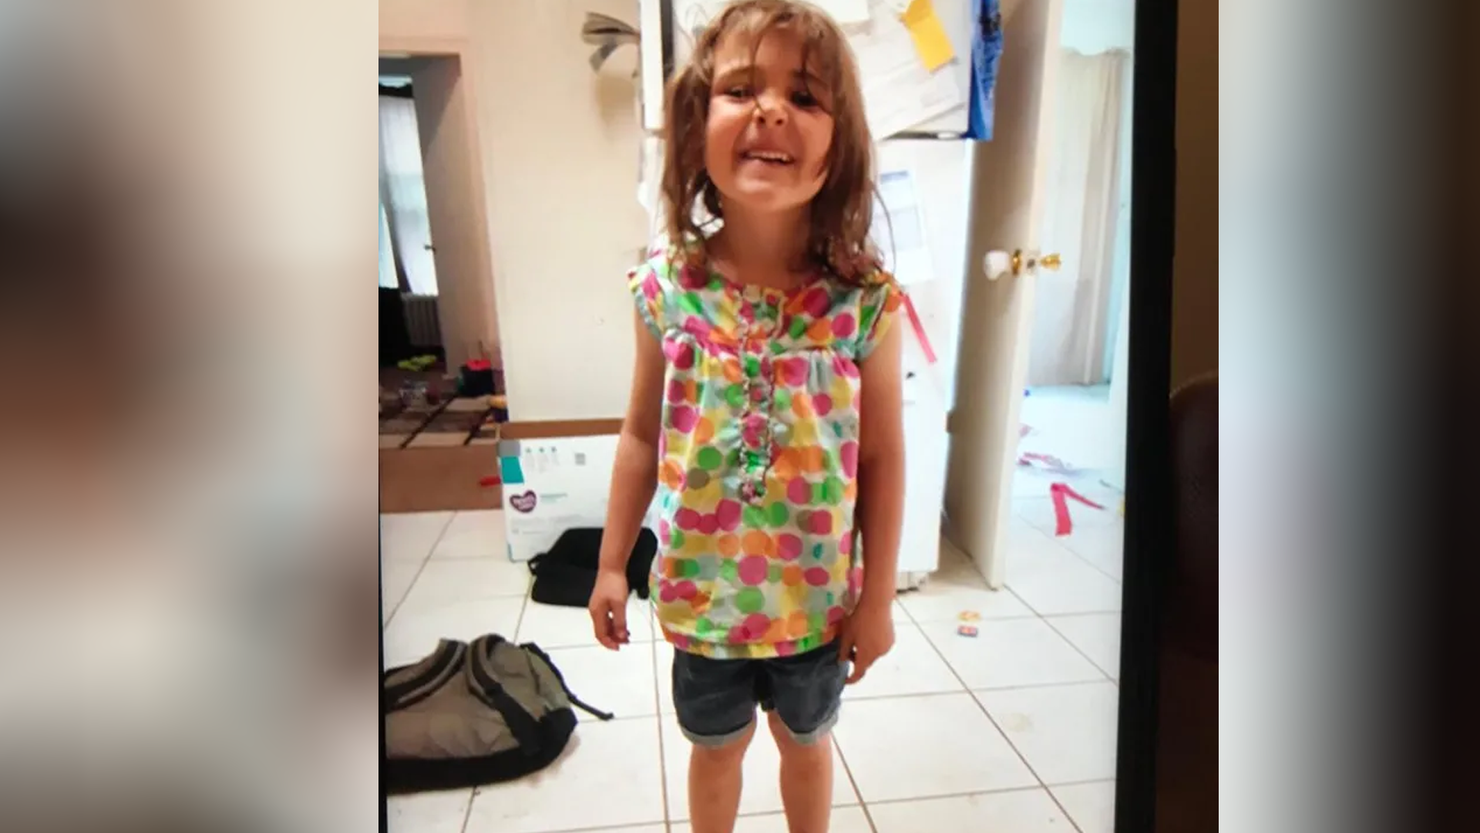 police in Utah searchign for missing 5-year-old